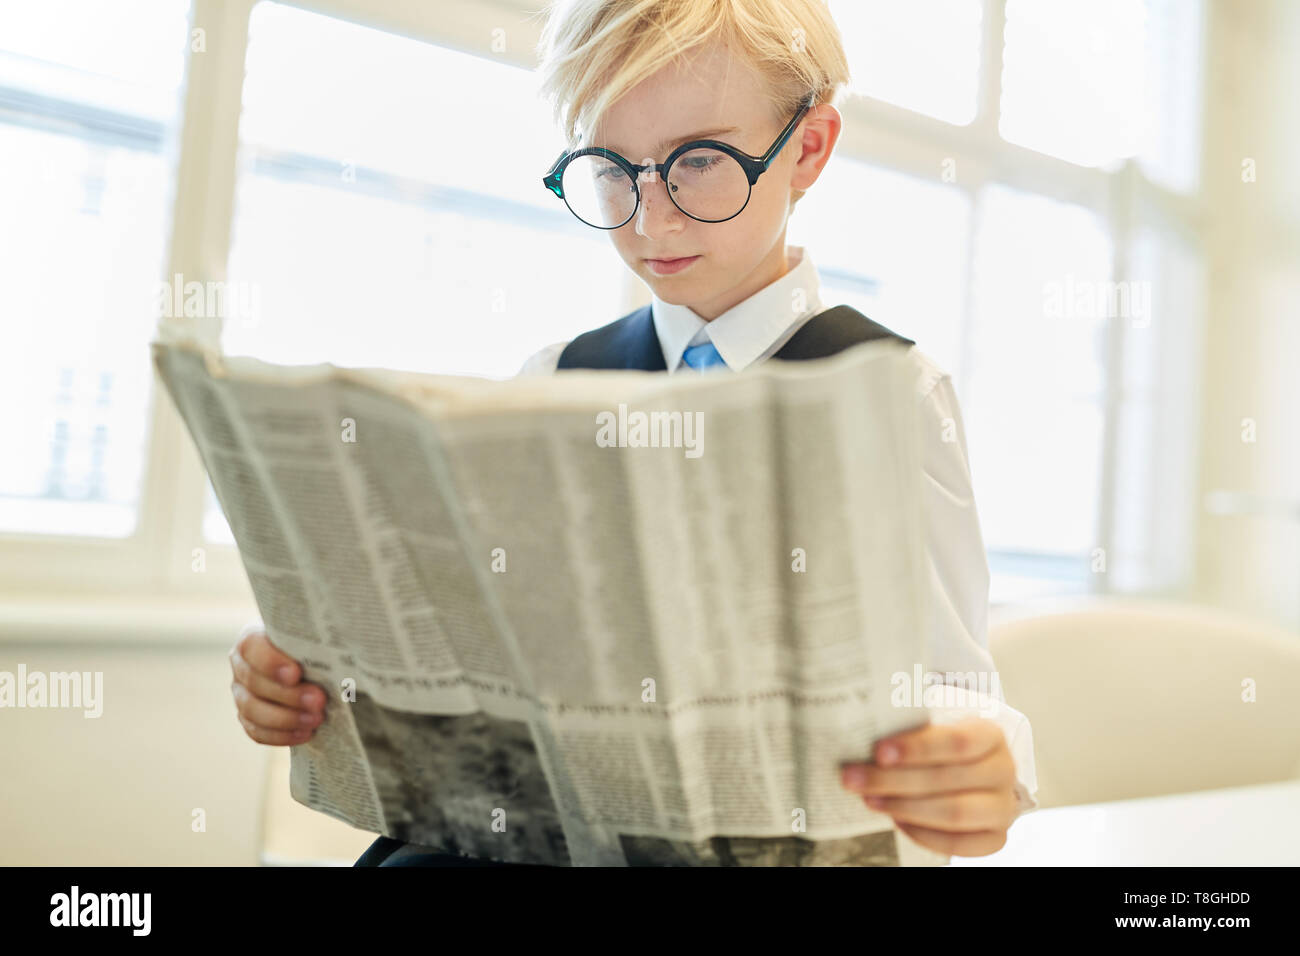 Boy as a businessman reads newspaper as a concept for print media and press freedom Stock Photo